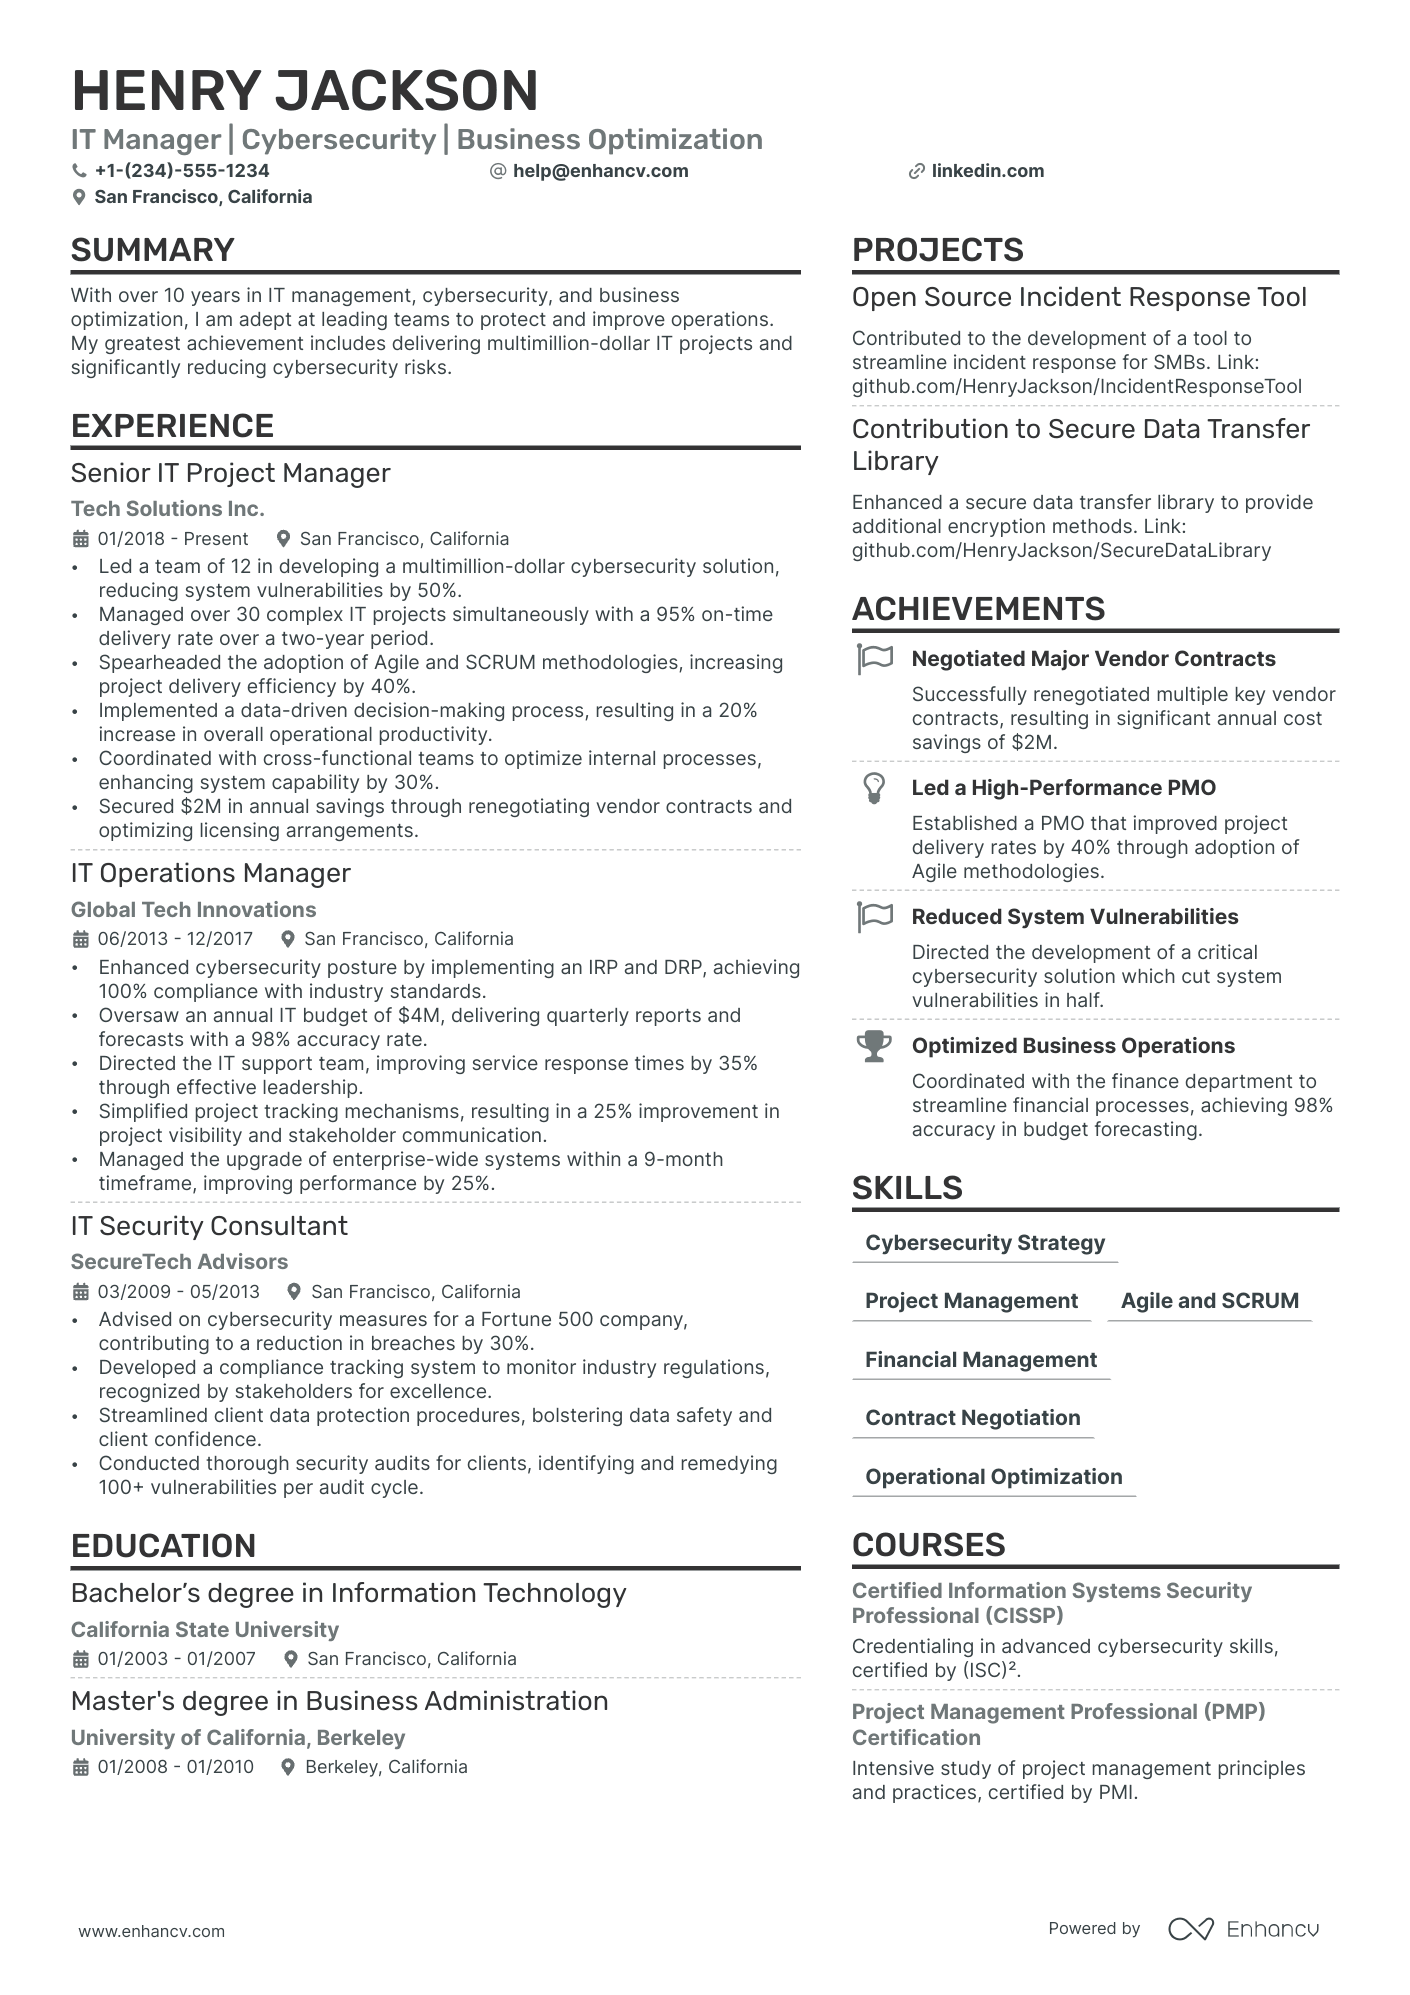 Technology Manager resume example